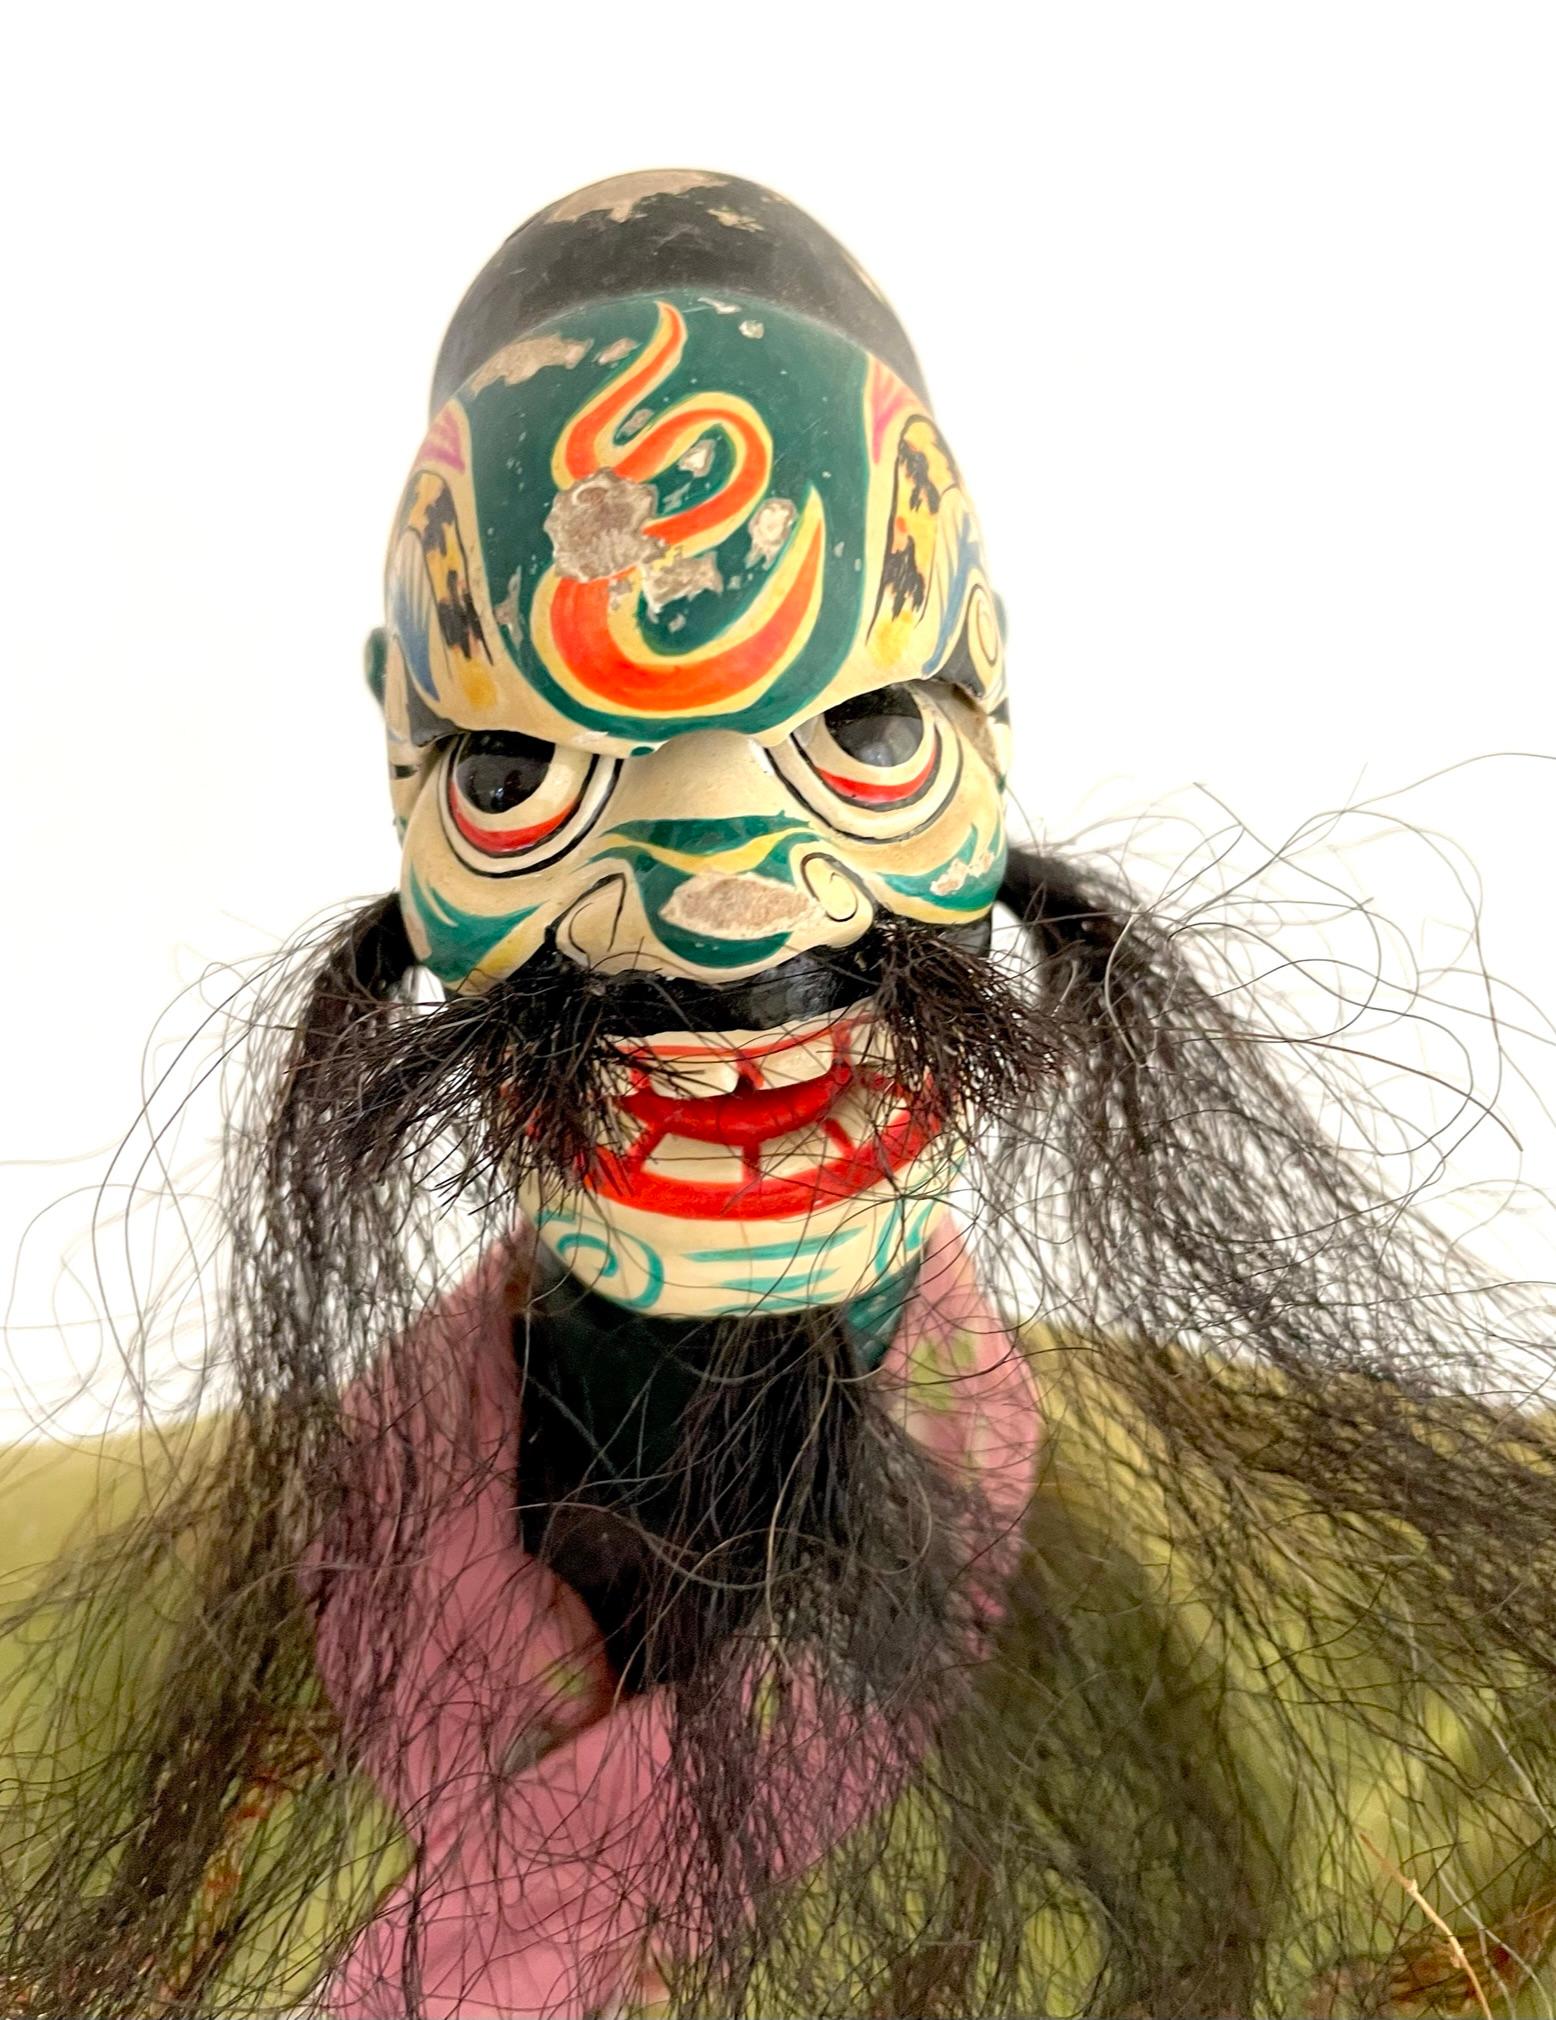 This Chinese opera hand puppet is dress in an elegant, embroidered silk dragon robe. The puppet head is of painted wood. The white face usually represents a villain. Puppetry is a major entertainment performance art in Chinese traditional theatre.